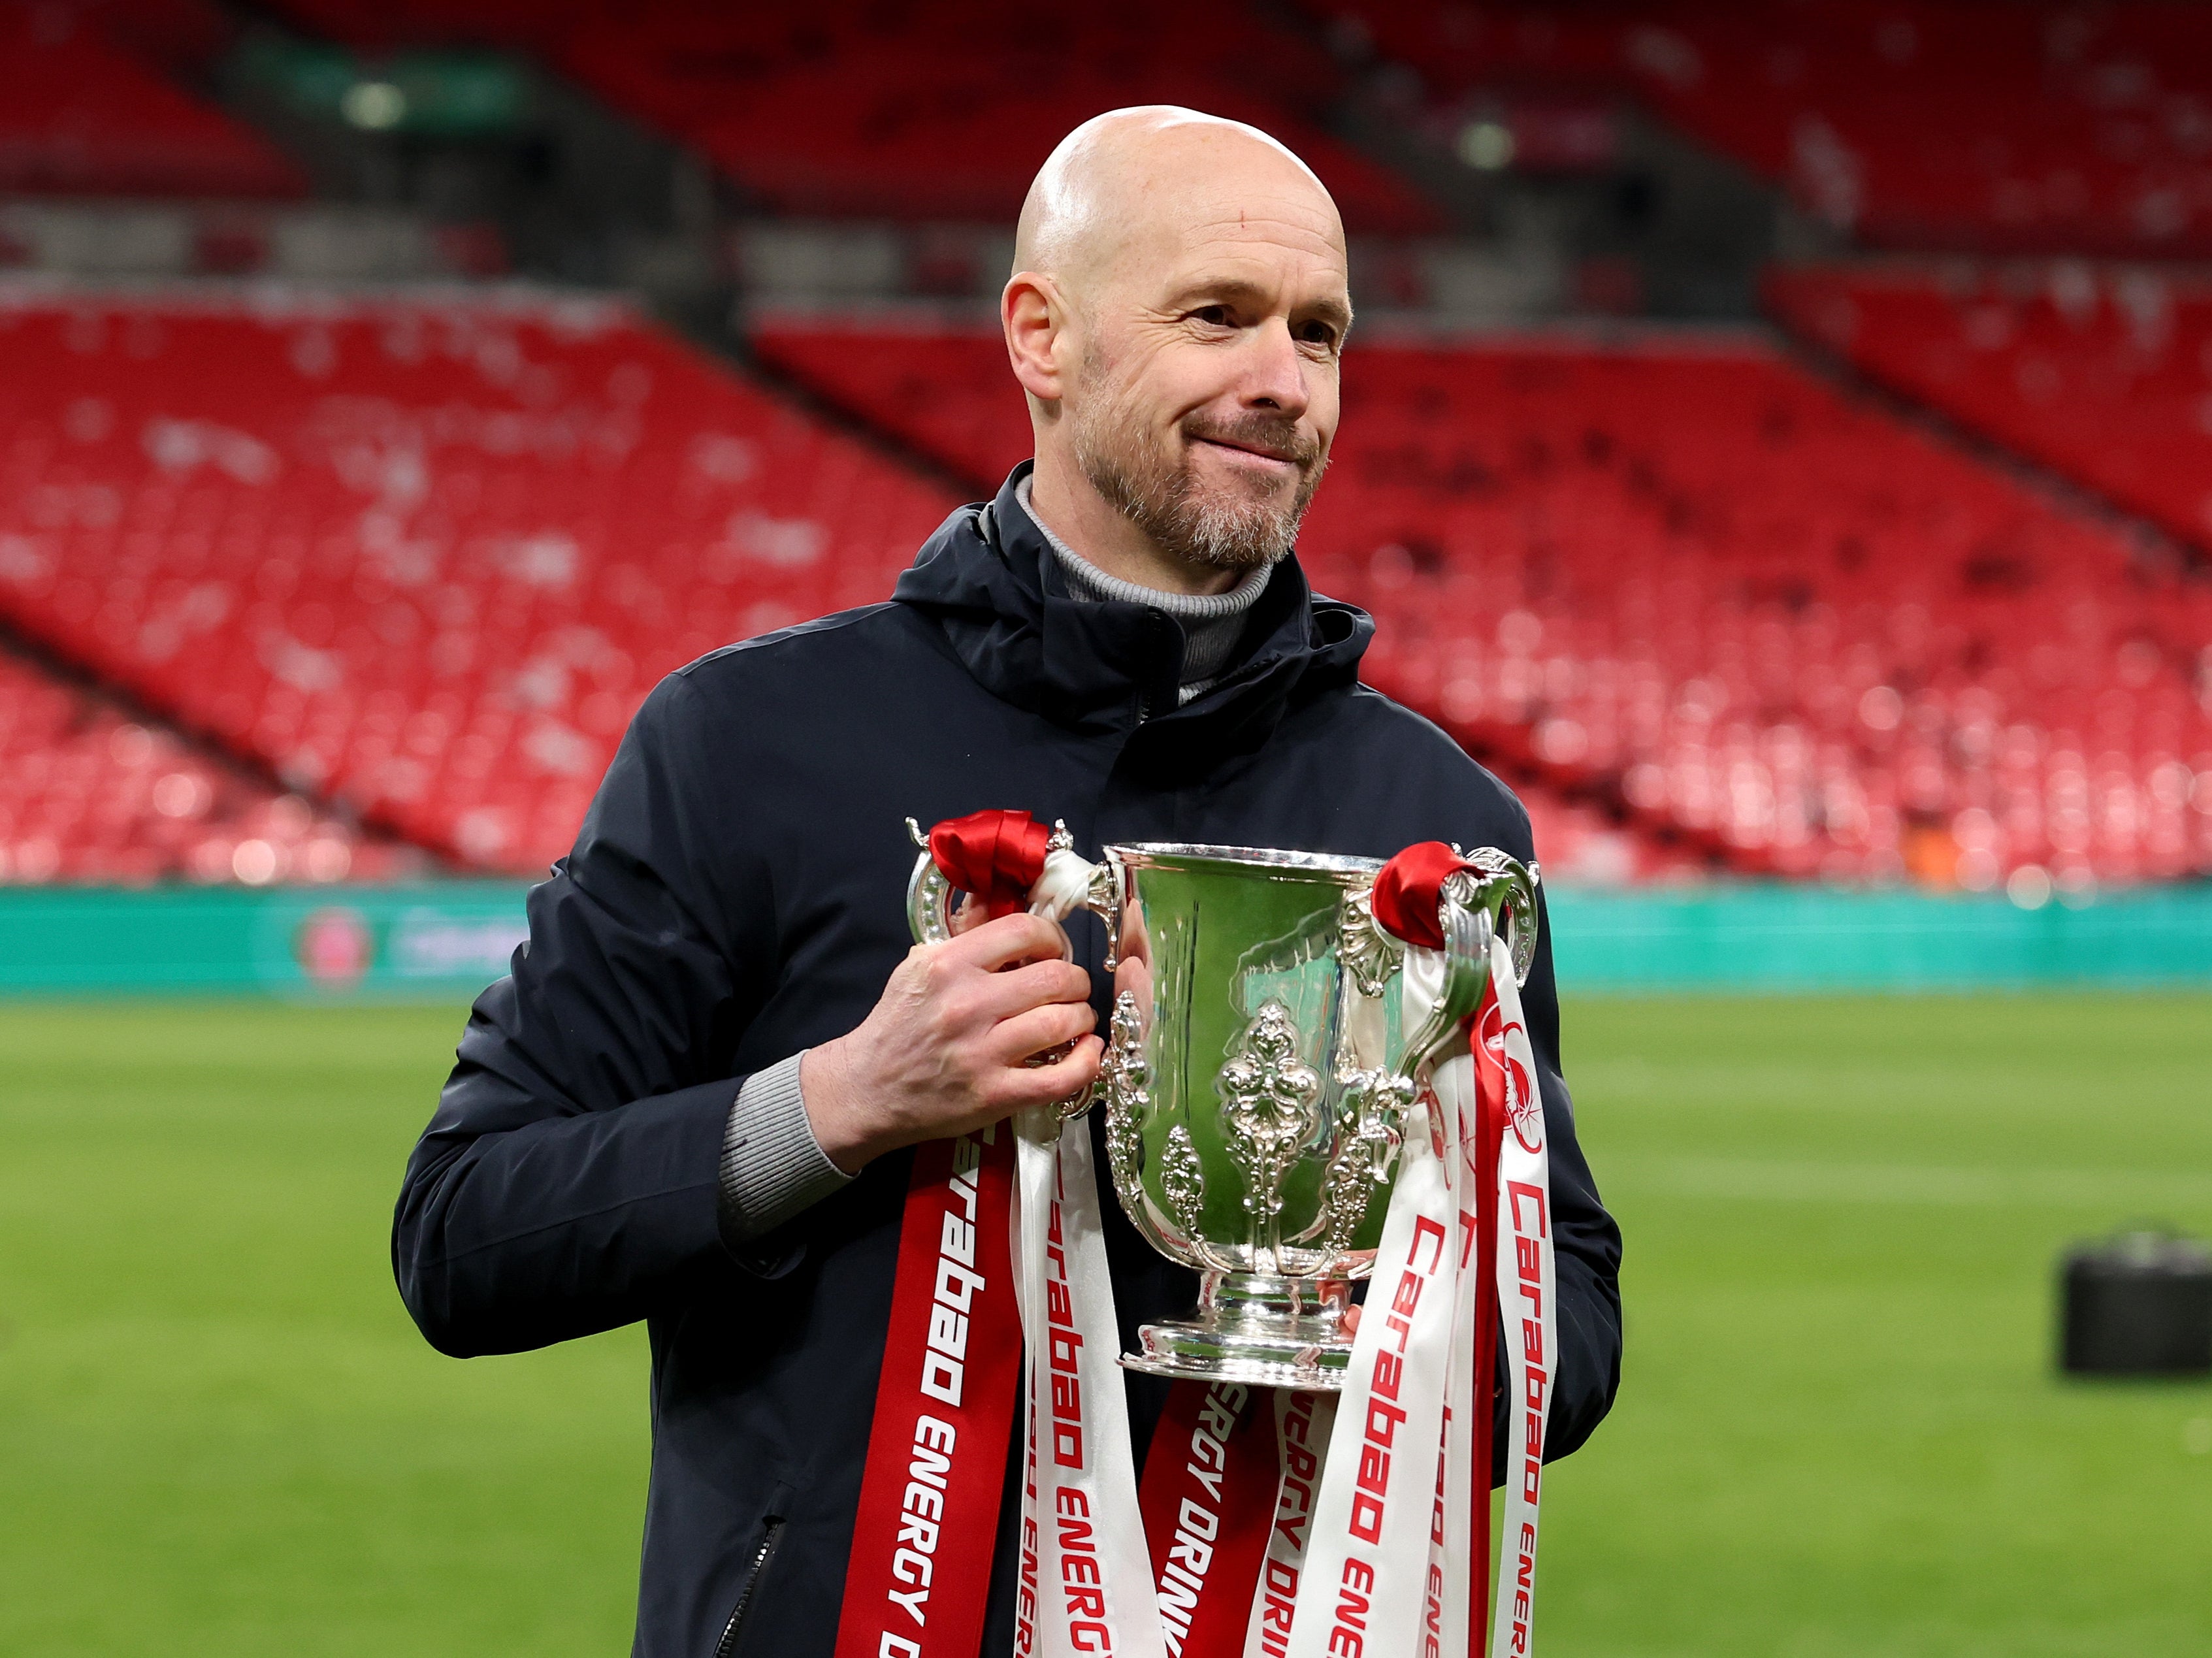 Erik ten Hag secured his first trophy as Manchester United manager with victory in the Carabao Cup final